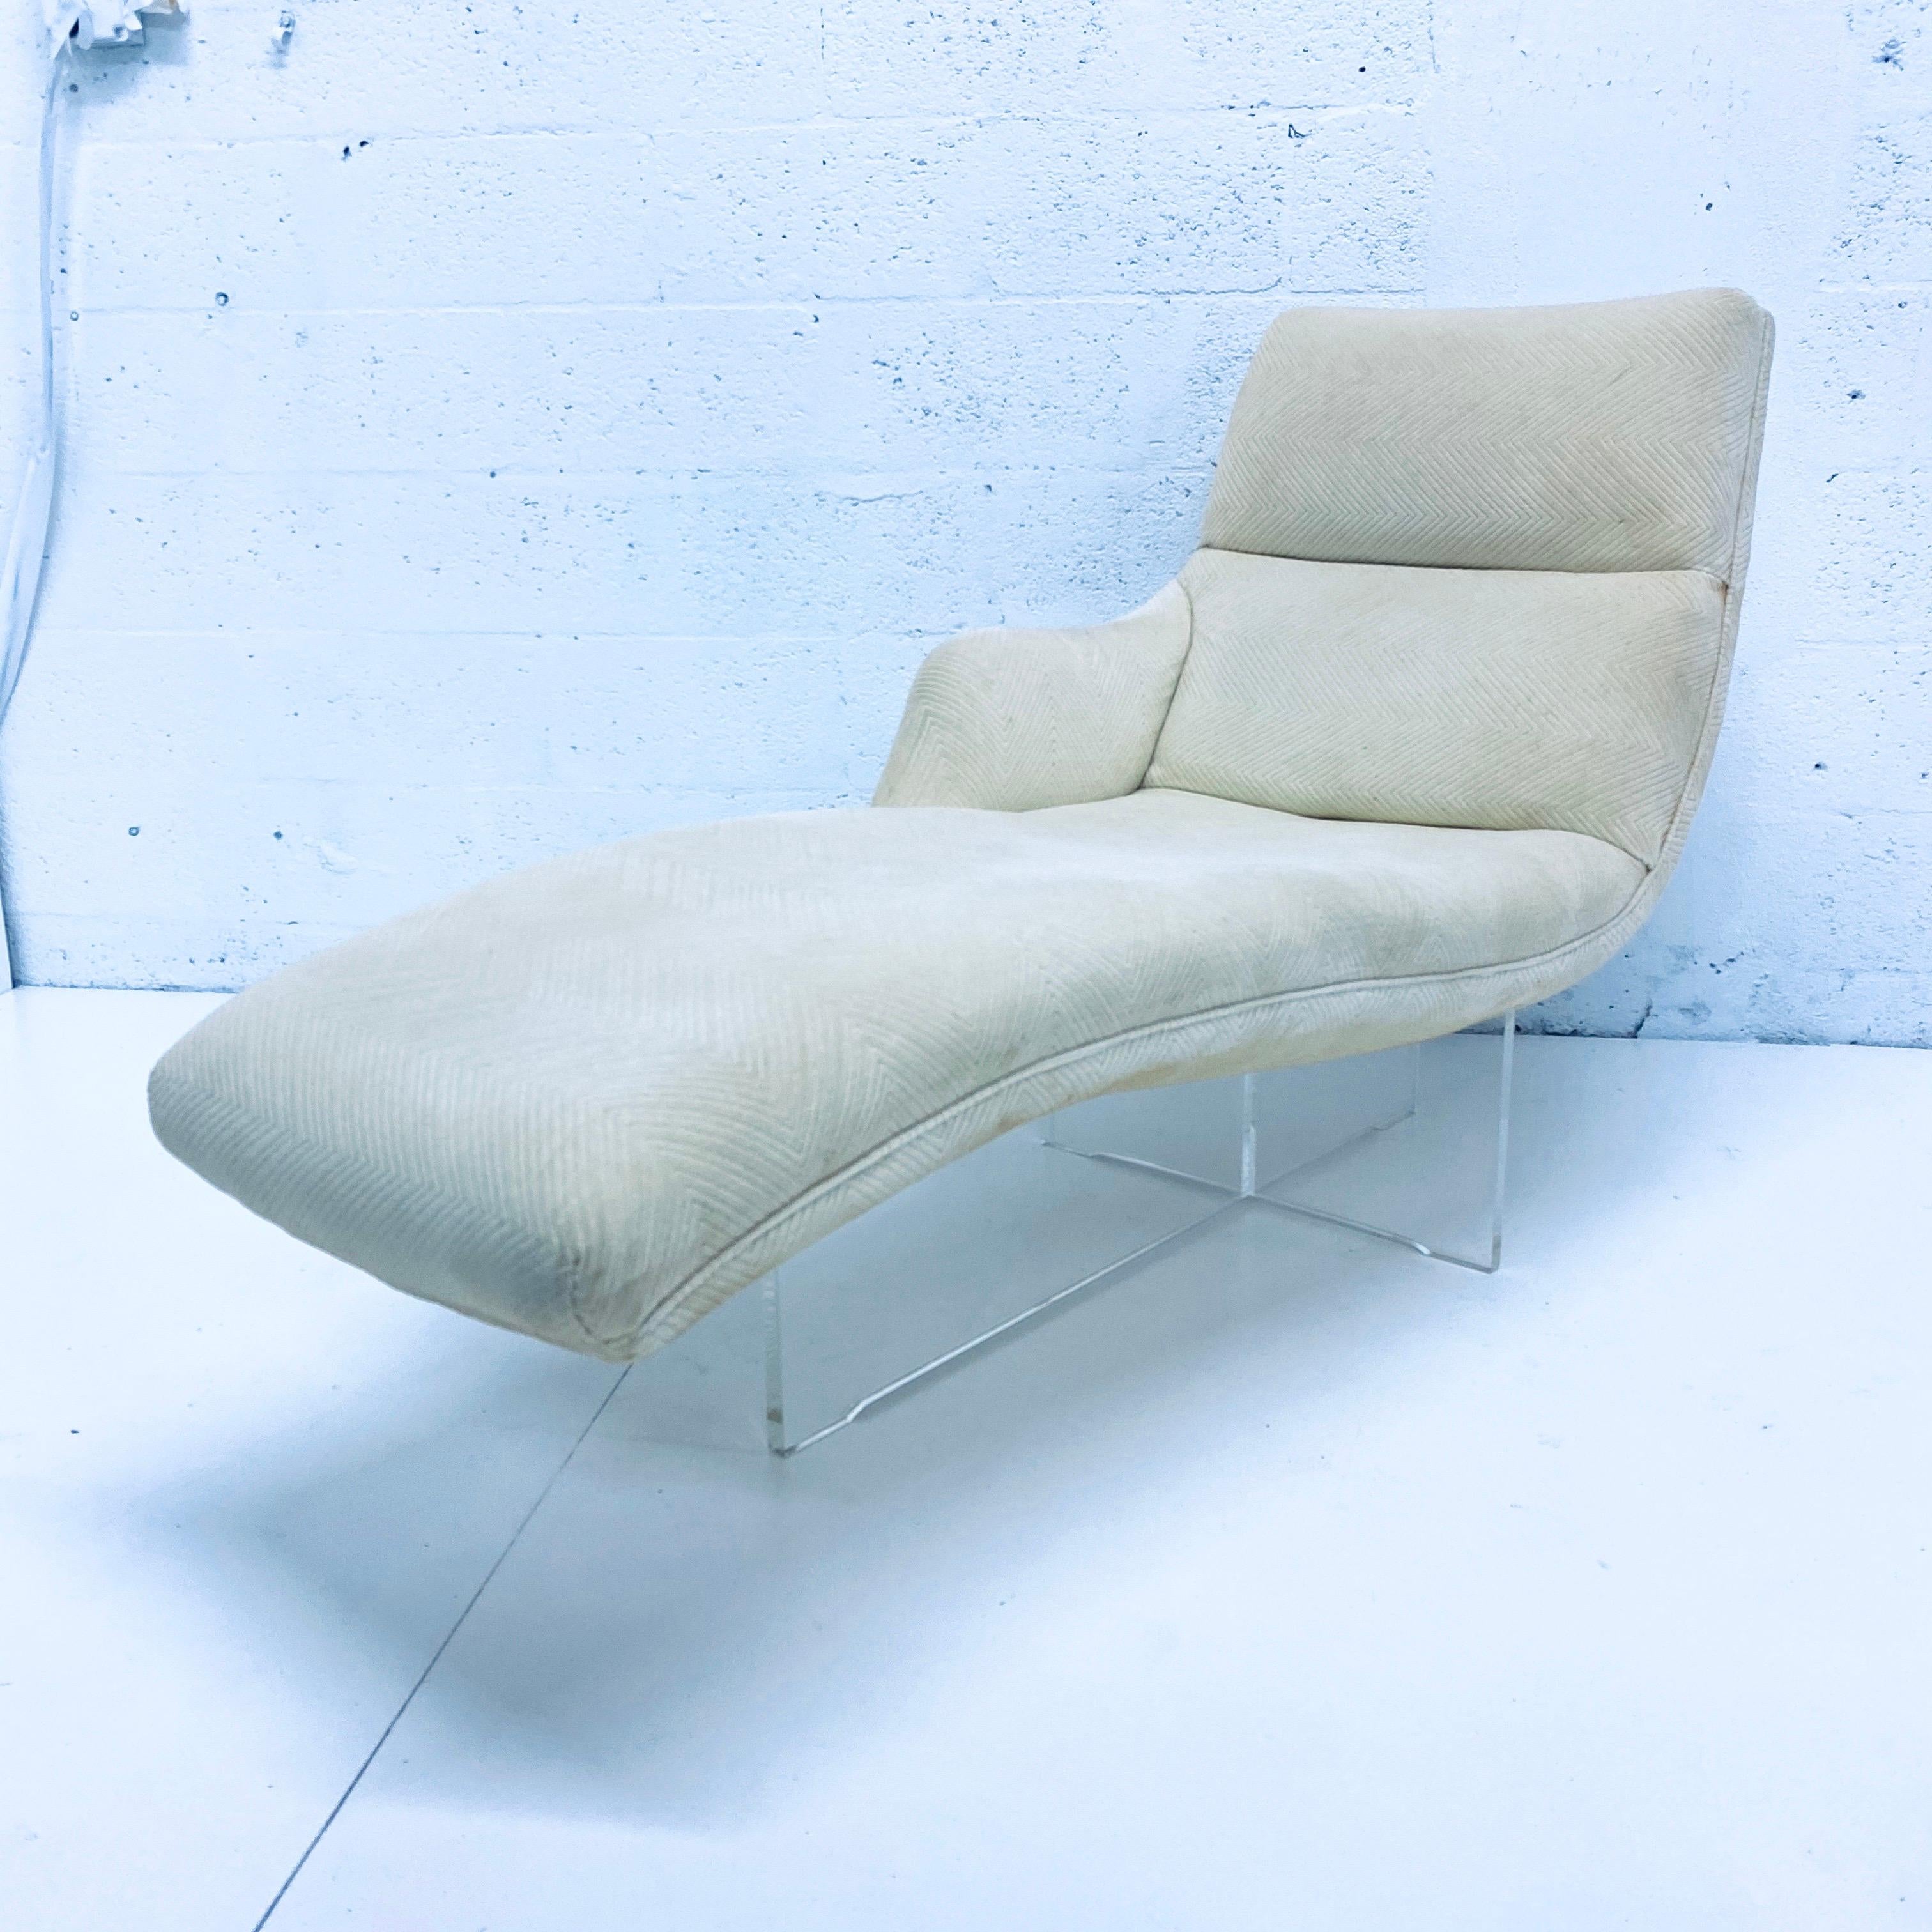 Original Erica chaise lounge with Lucite base by Vladimir Kagan. Ready for new upholstery.

We have an opposing Kagan Erica chaise lounge available in our listings and ready for new upholstery. This listing is for the single chaise.